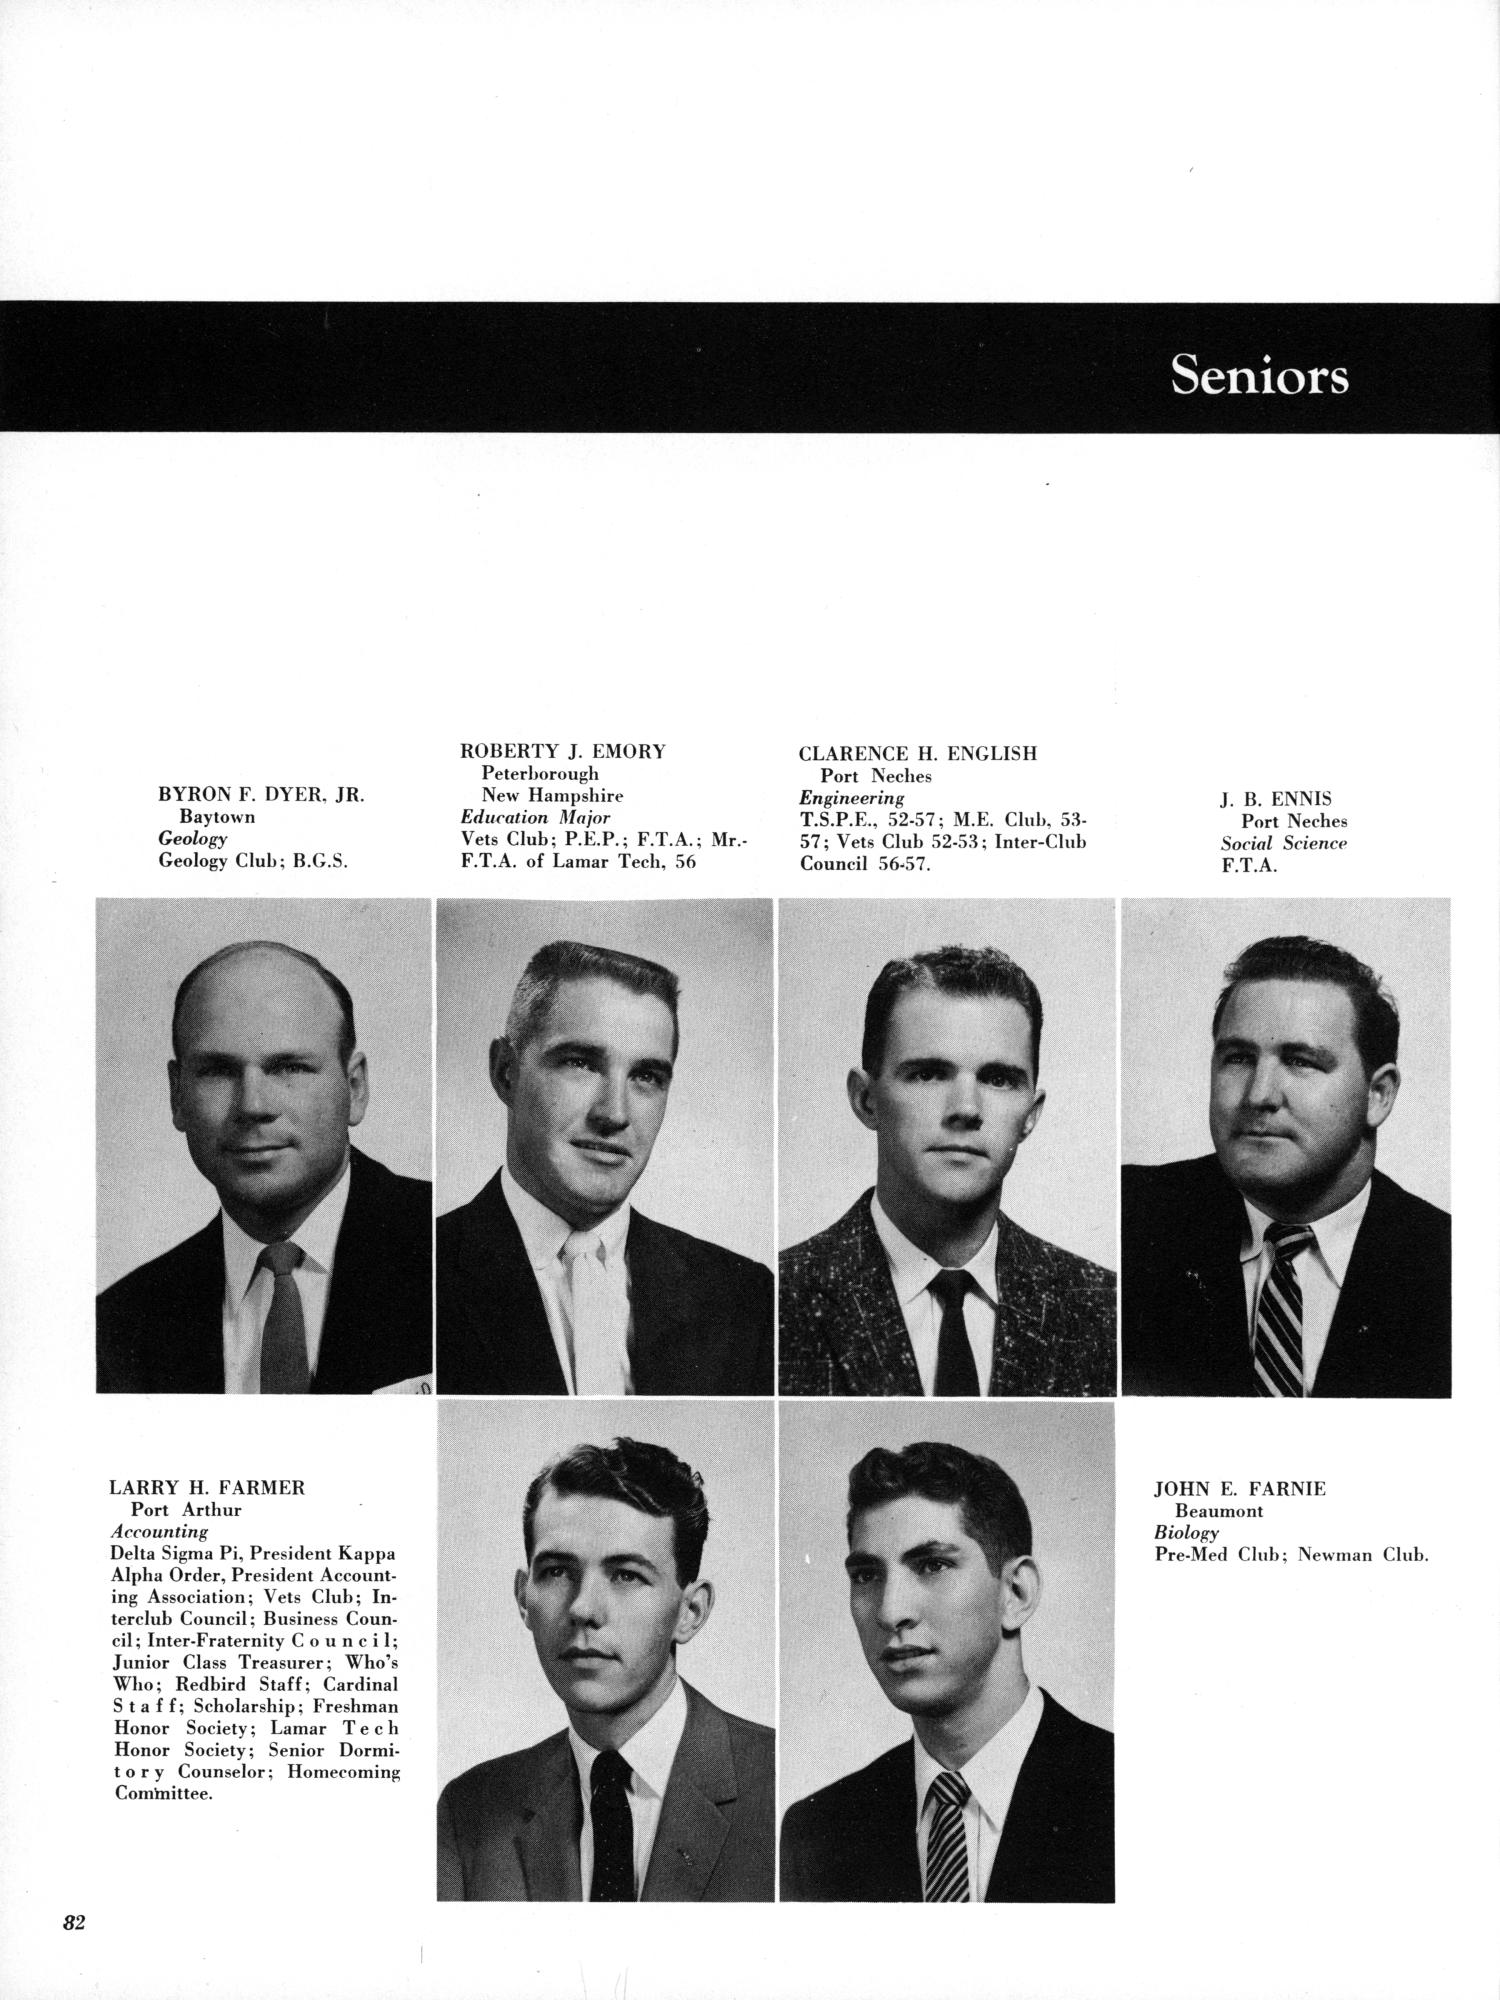 The Cardinal, Yearbook of Lamar State College of Technology, 1957
                                                
                                                    82
                                                